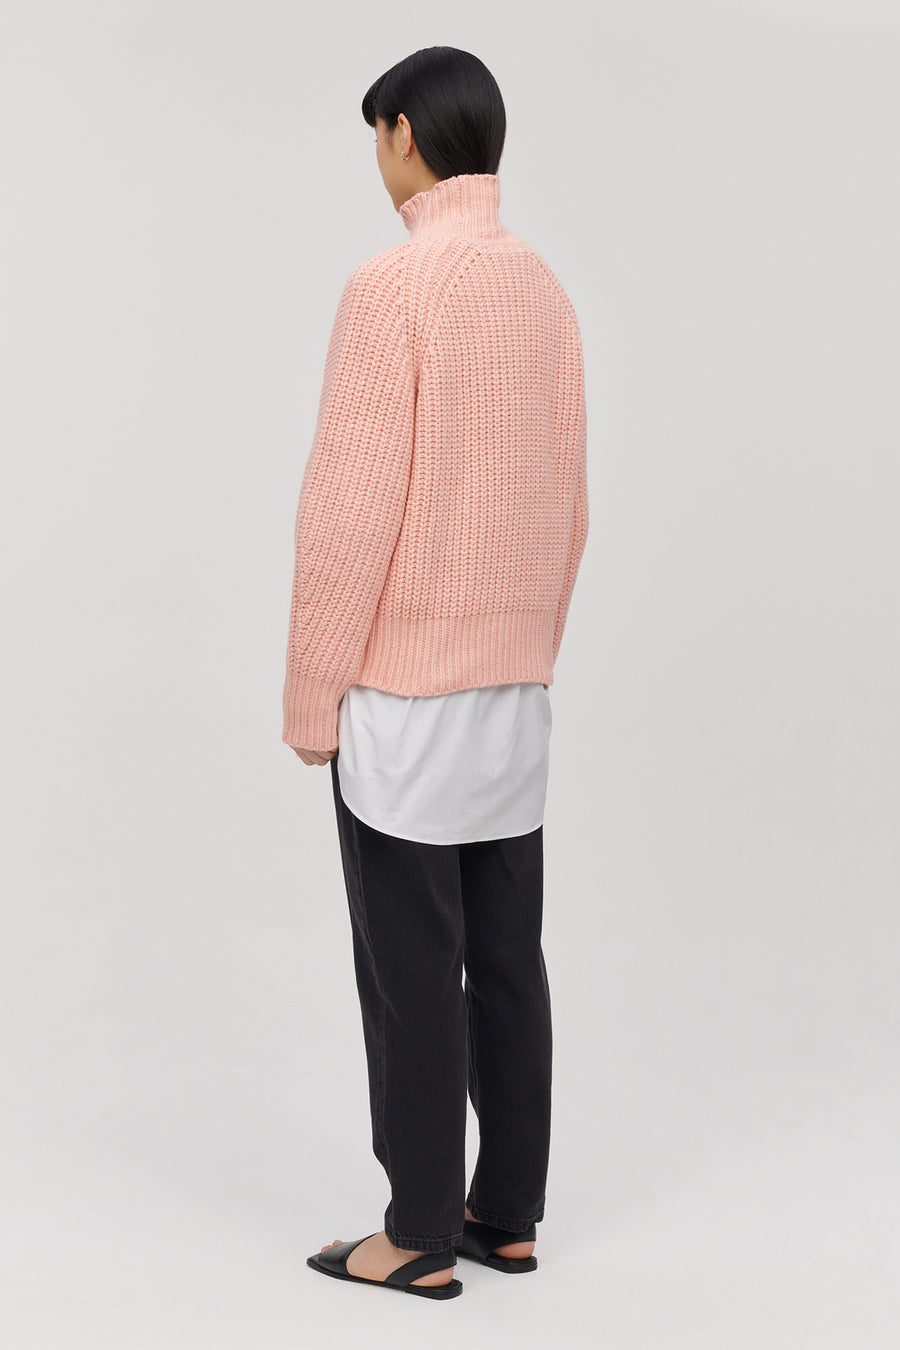 PATSY KNITTED JUMPER SOFT PINK